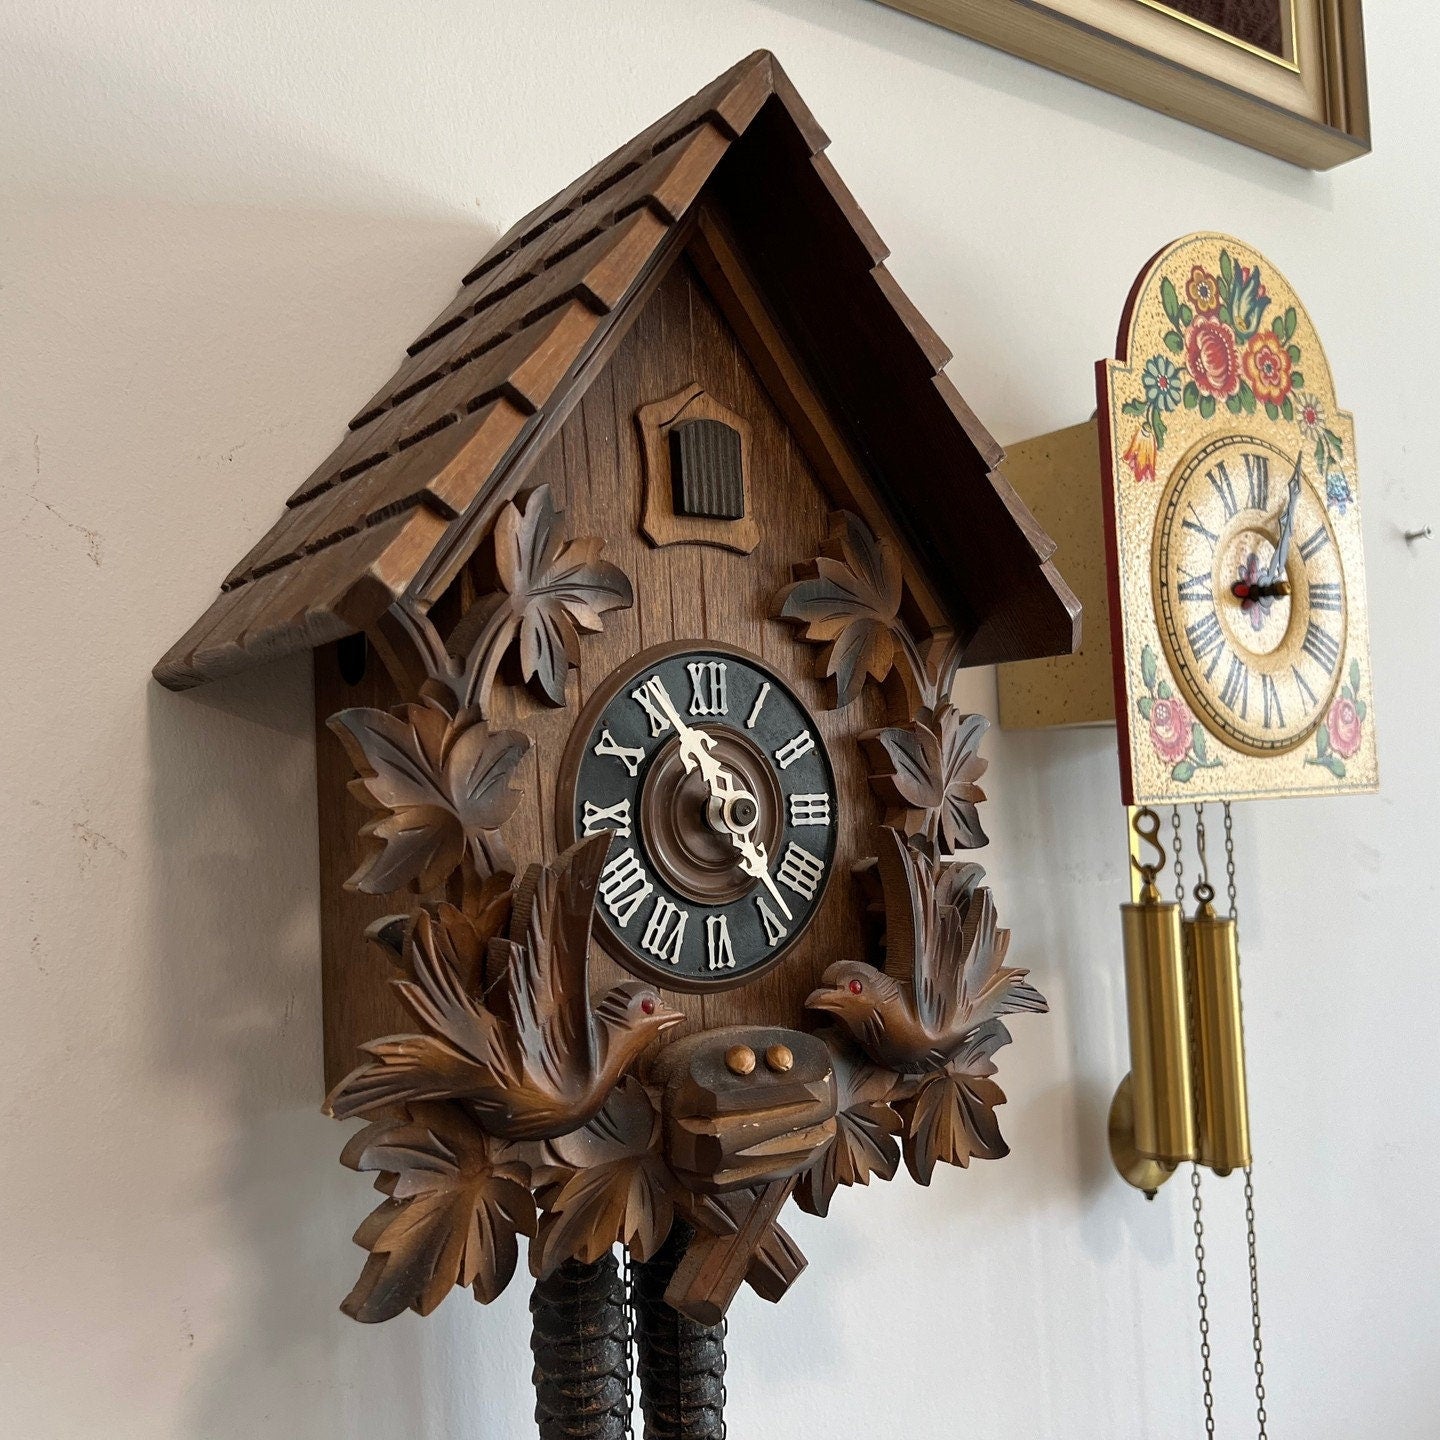 Collectible Antique Large Cuckoo Clock - Perfect Condition, Fully Functional